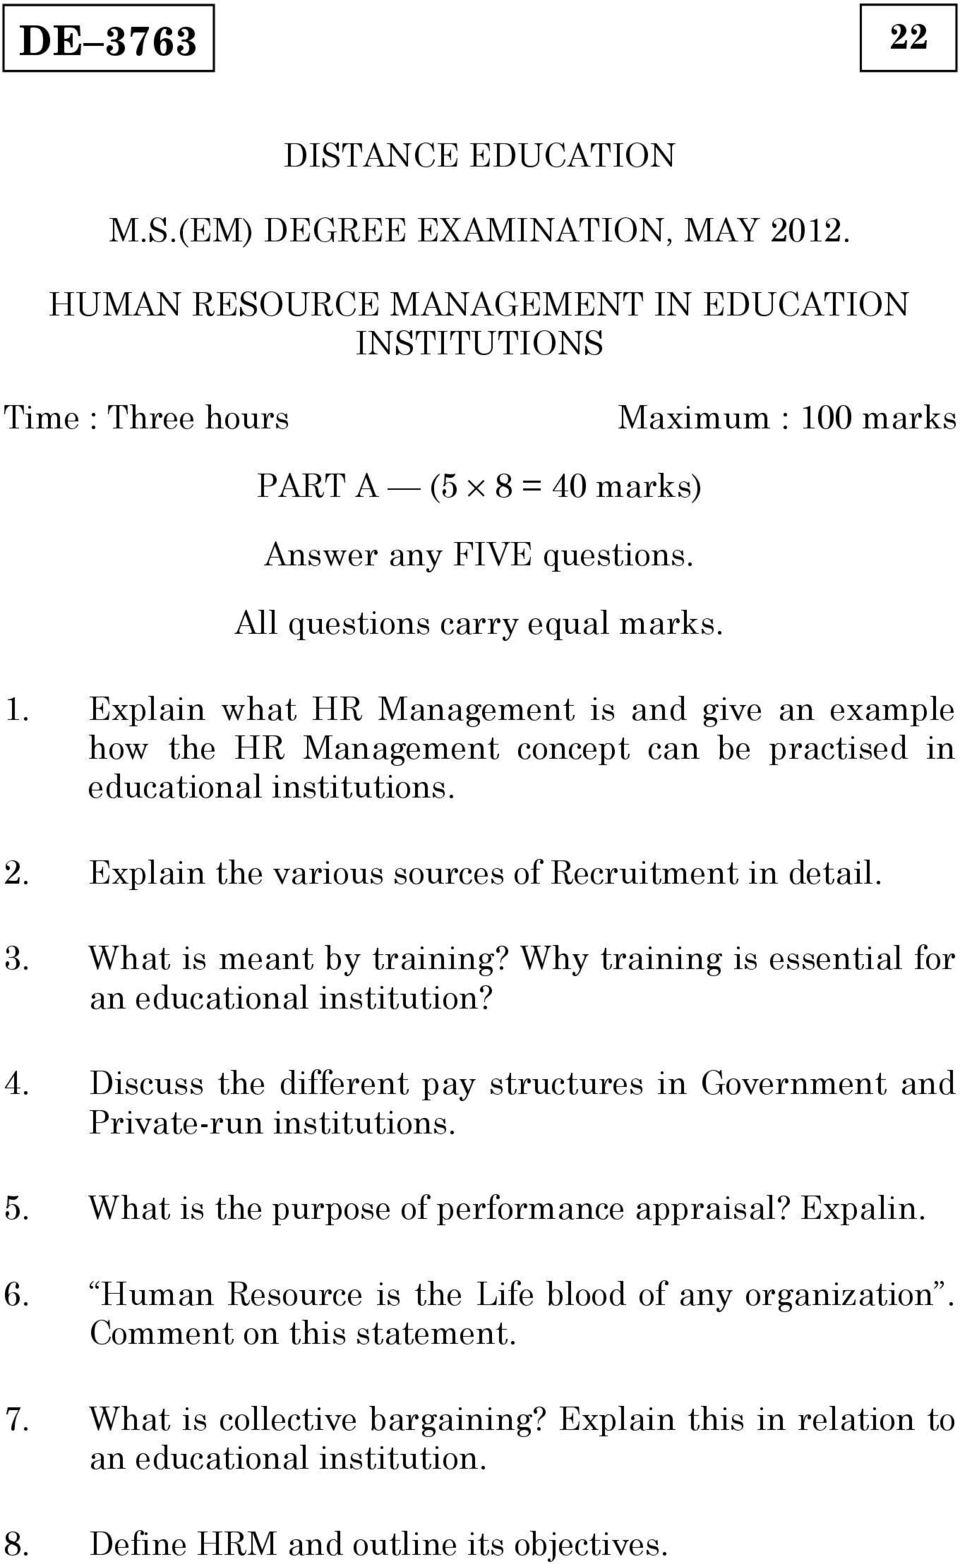 0 marks PART A (5 8 = 40 marks) Answer any FIVE questions. 1. Explain what HR Management is and give an example how the HR Management concept can be practised in educational institutions. 2.